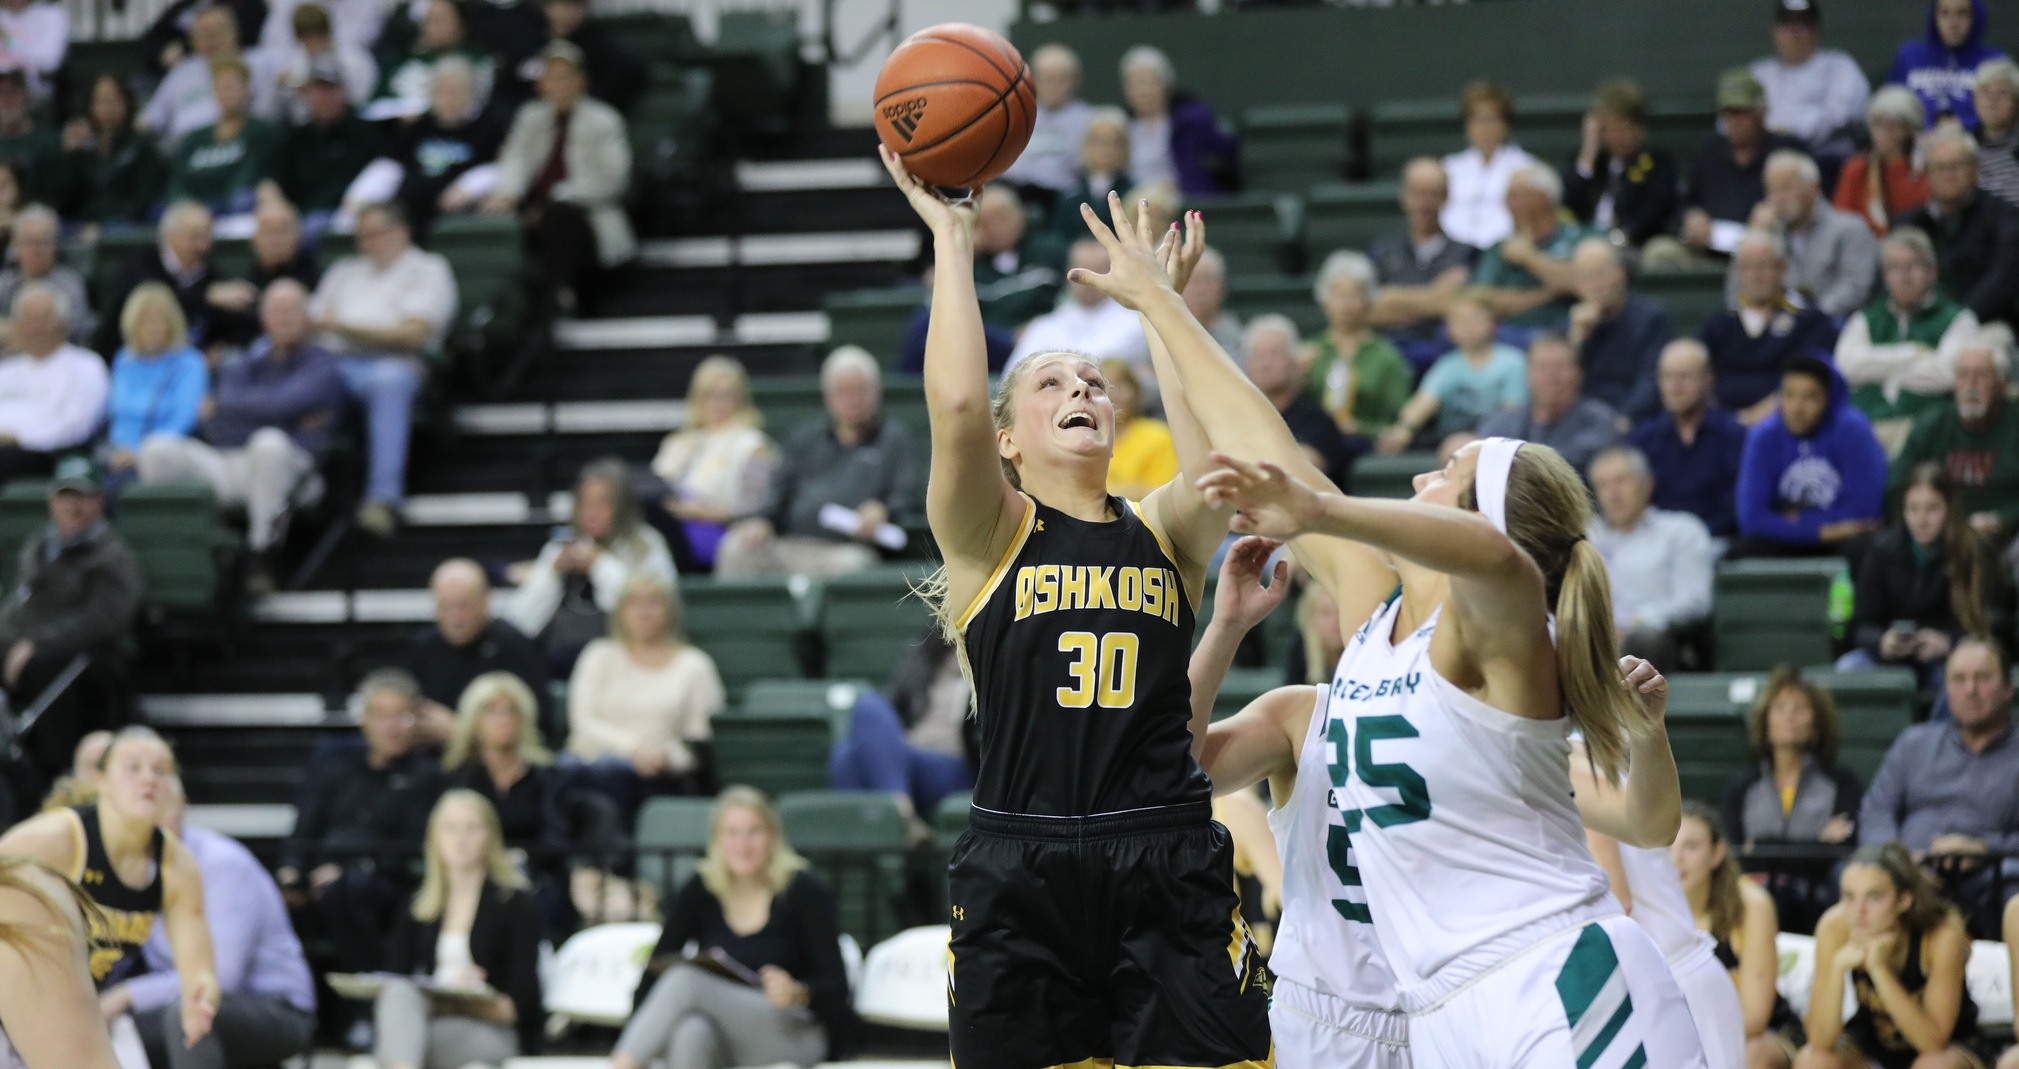 Emily Miller had a career-high 11 points and five rebounds against the Tigers.